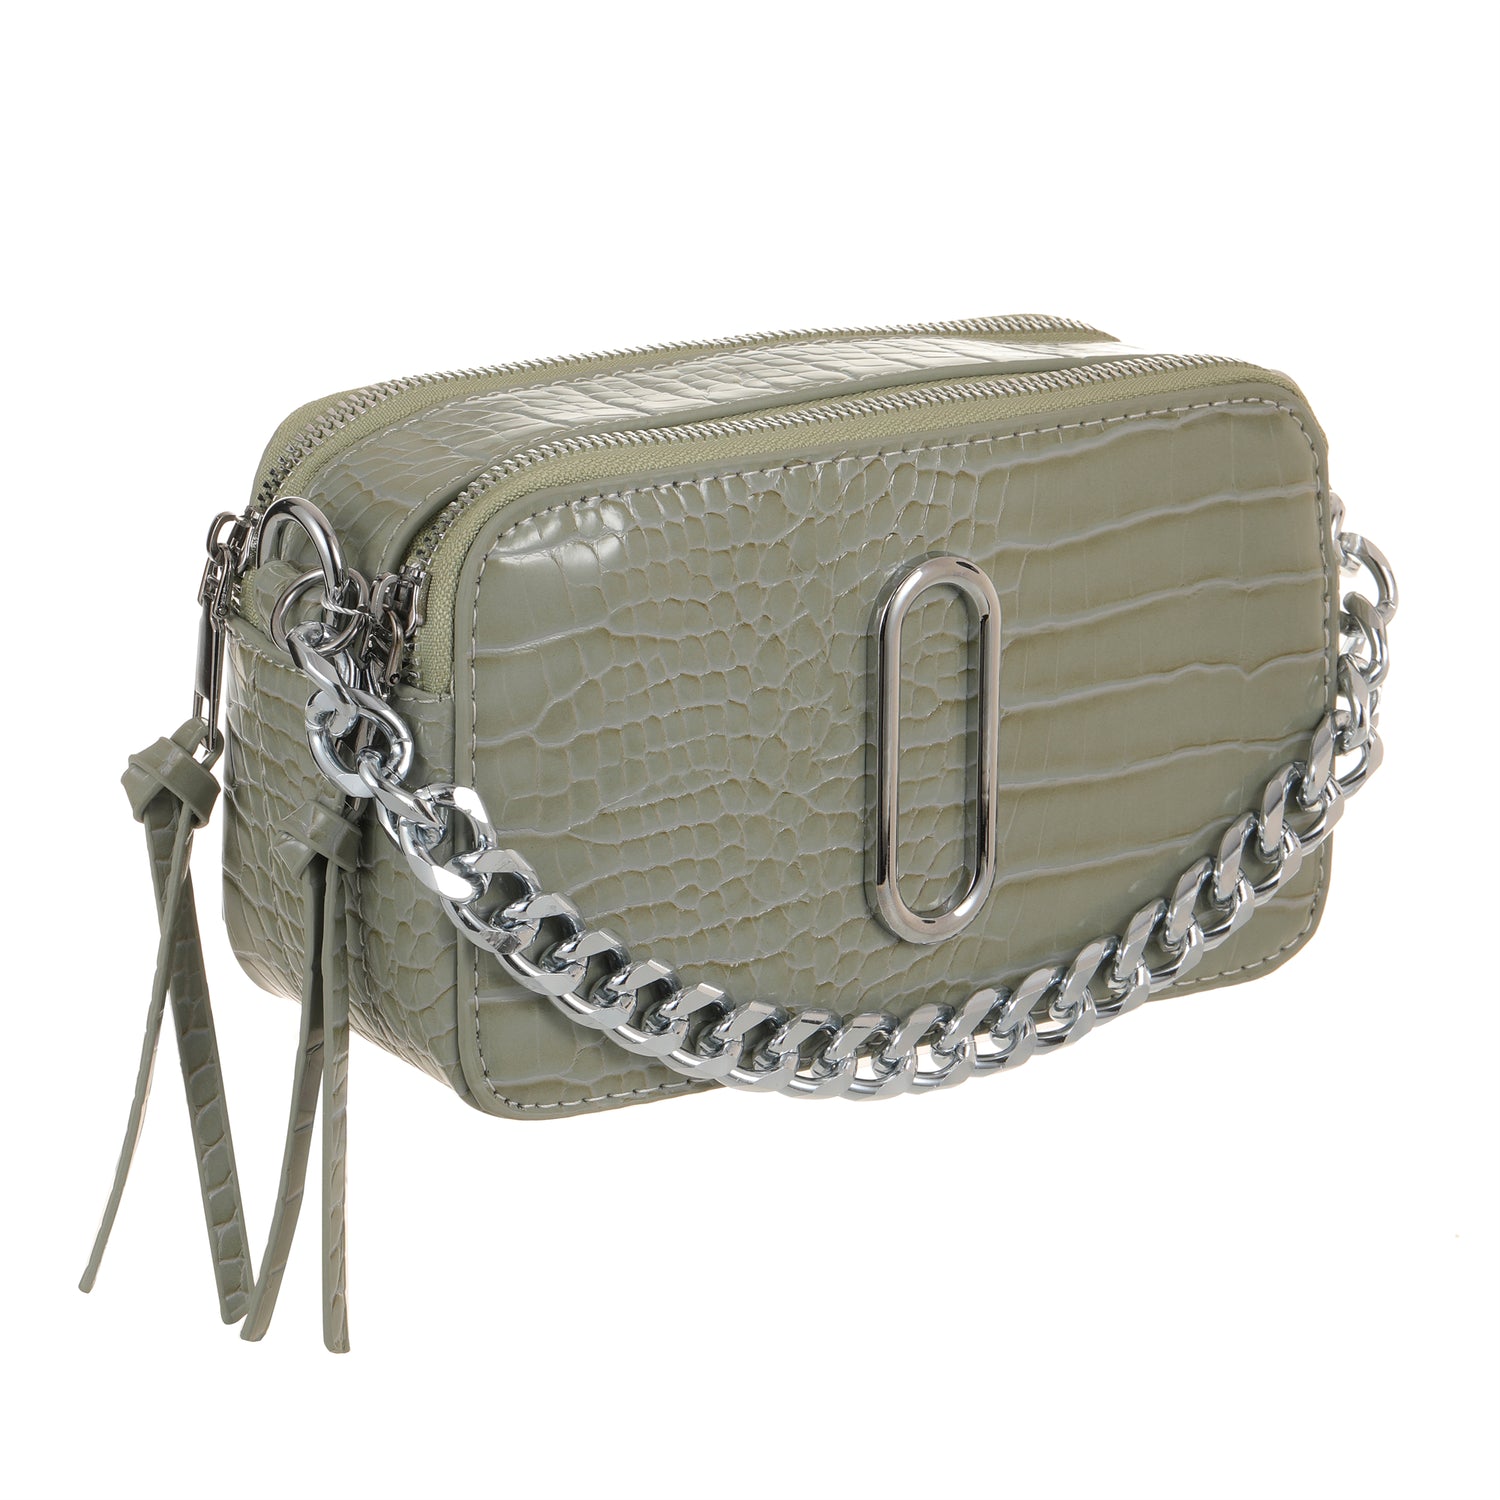 Lucy bag grey